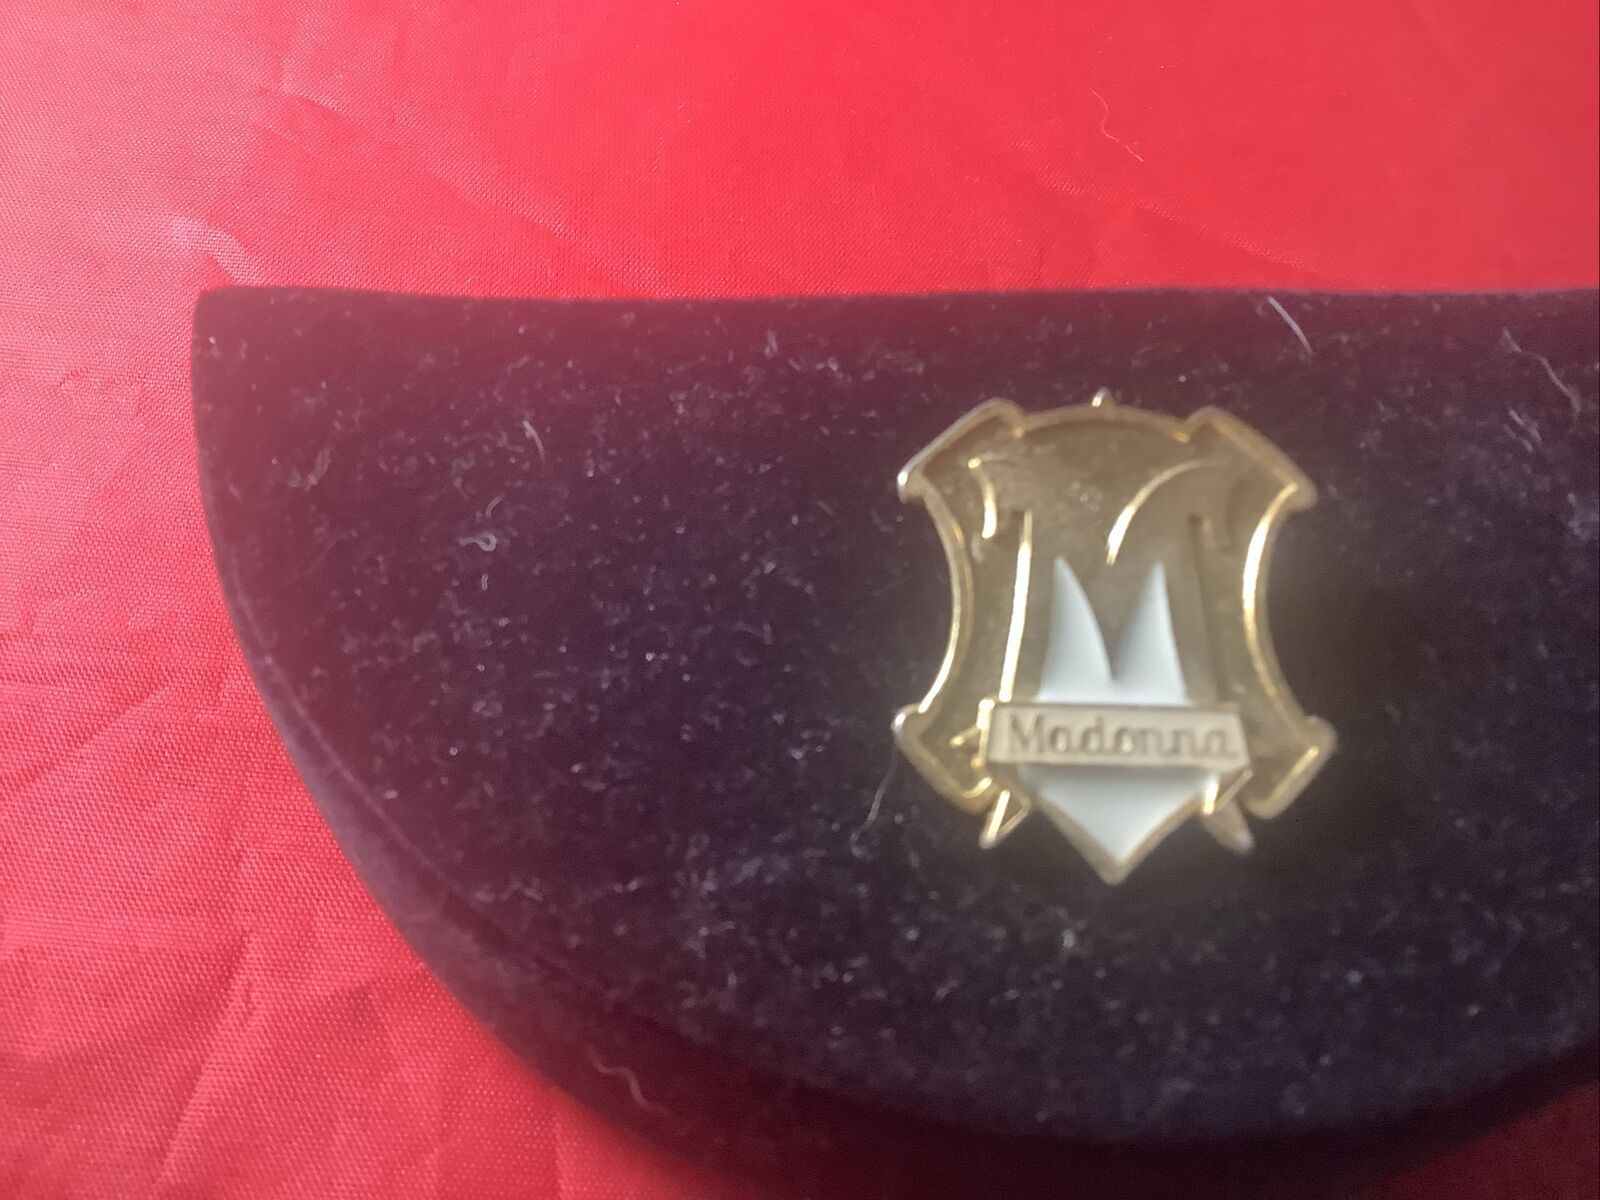 Madonna The Immaculate Collection Emblem, button back, pin. Vintage / Rare 1990